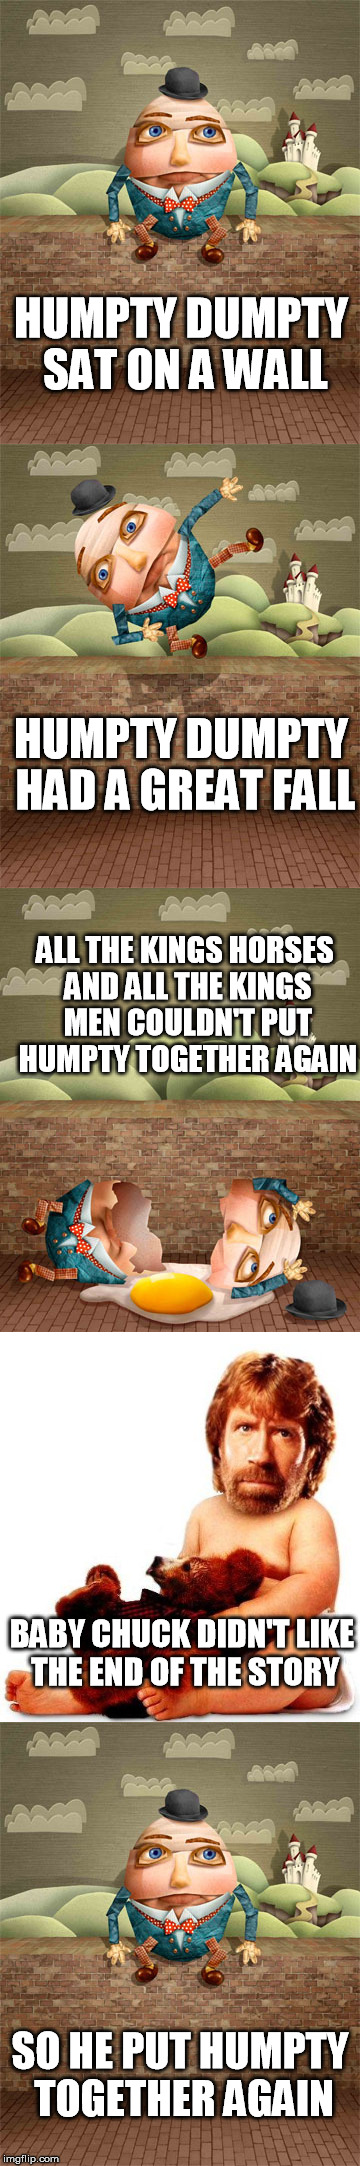 Chuck Norris Nursery Time - Chuck Norris Week (A Sir-Unknown event) | HUMPTY DUMPTY SAT ON A WALL; HUMPTY DUMPTY HAD A GREAT FALL; ALL THE KINGS HORSES AND ALL THE KINGS MEN COULDN'T PUT HUMPTY TOGETHER AGAIN; BABY CHUCK DIDN'T LIKE THE END OF THE STORY; SO HE PUT HUMPTY TOGETHER AGAIN | image tagged in chuck norris week,chuck norris,humpty dumpty,funny,nursery rhymes | made w/ Imgflip meme maker